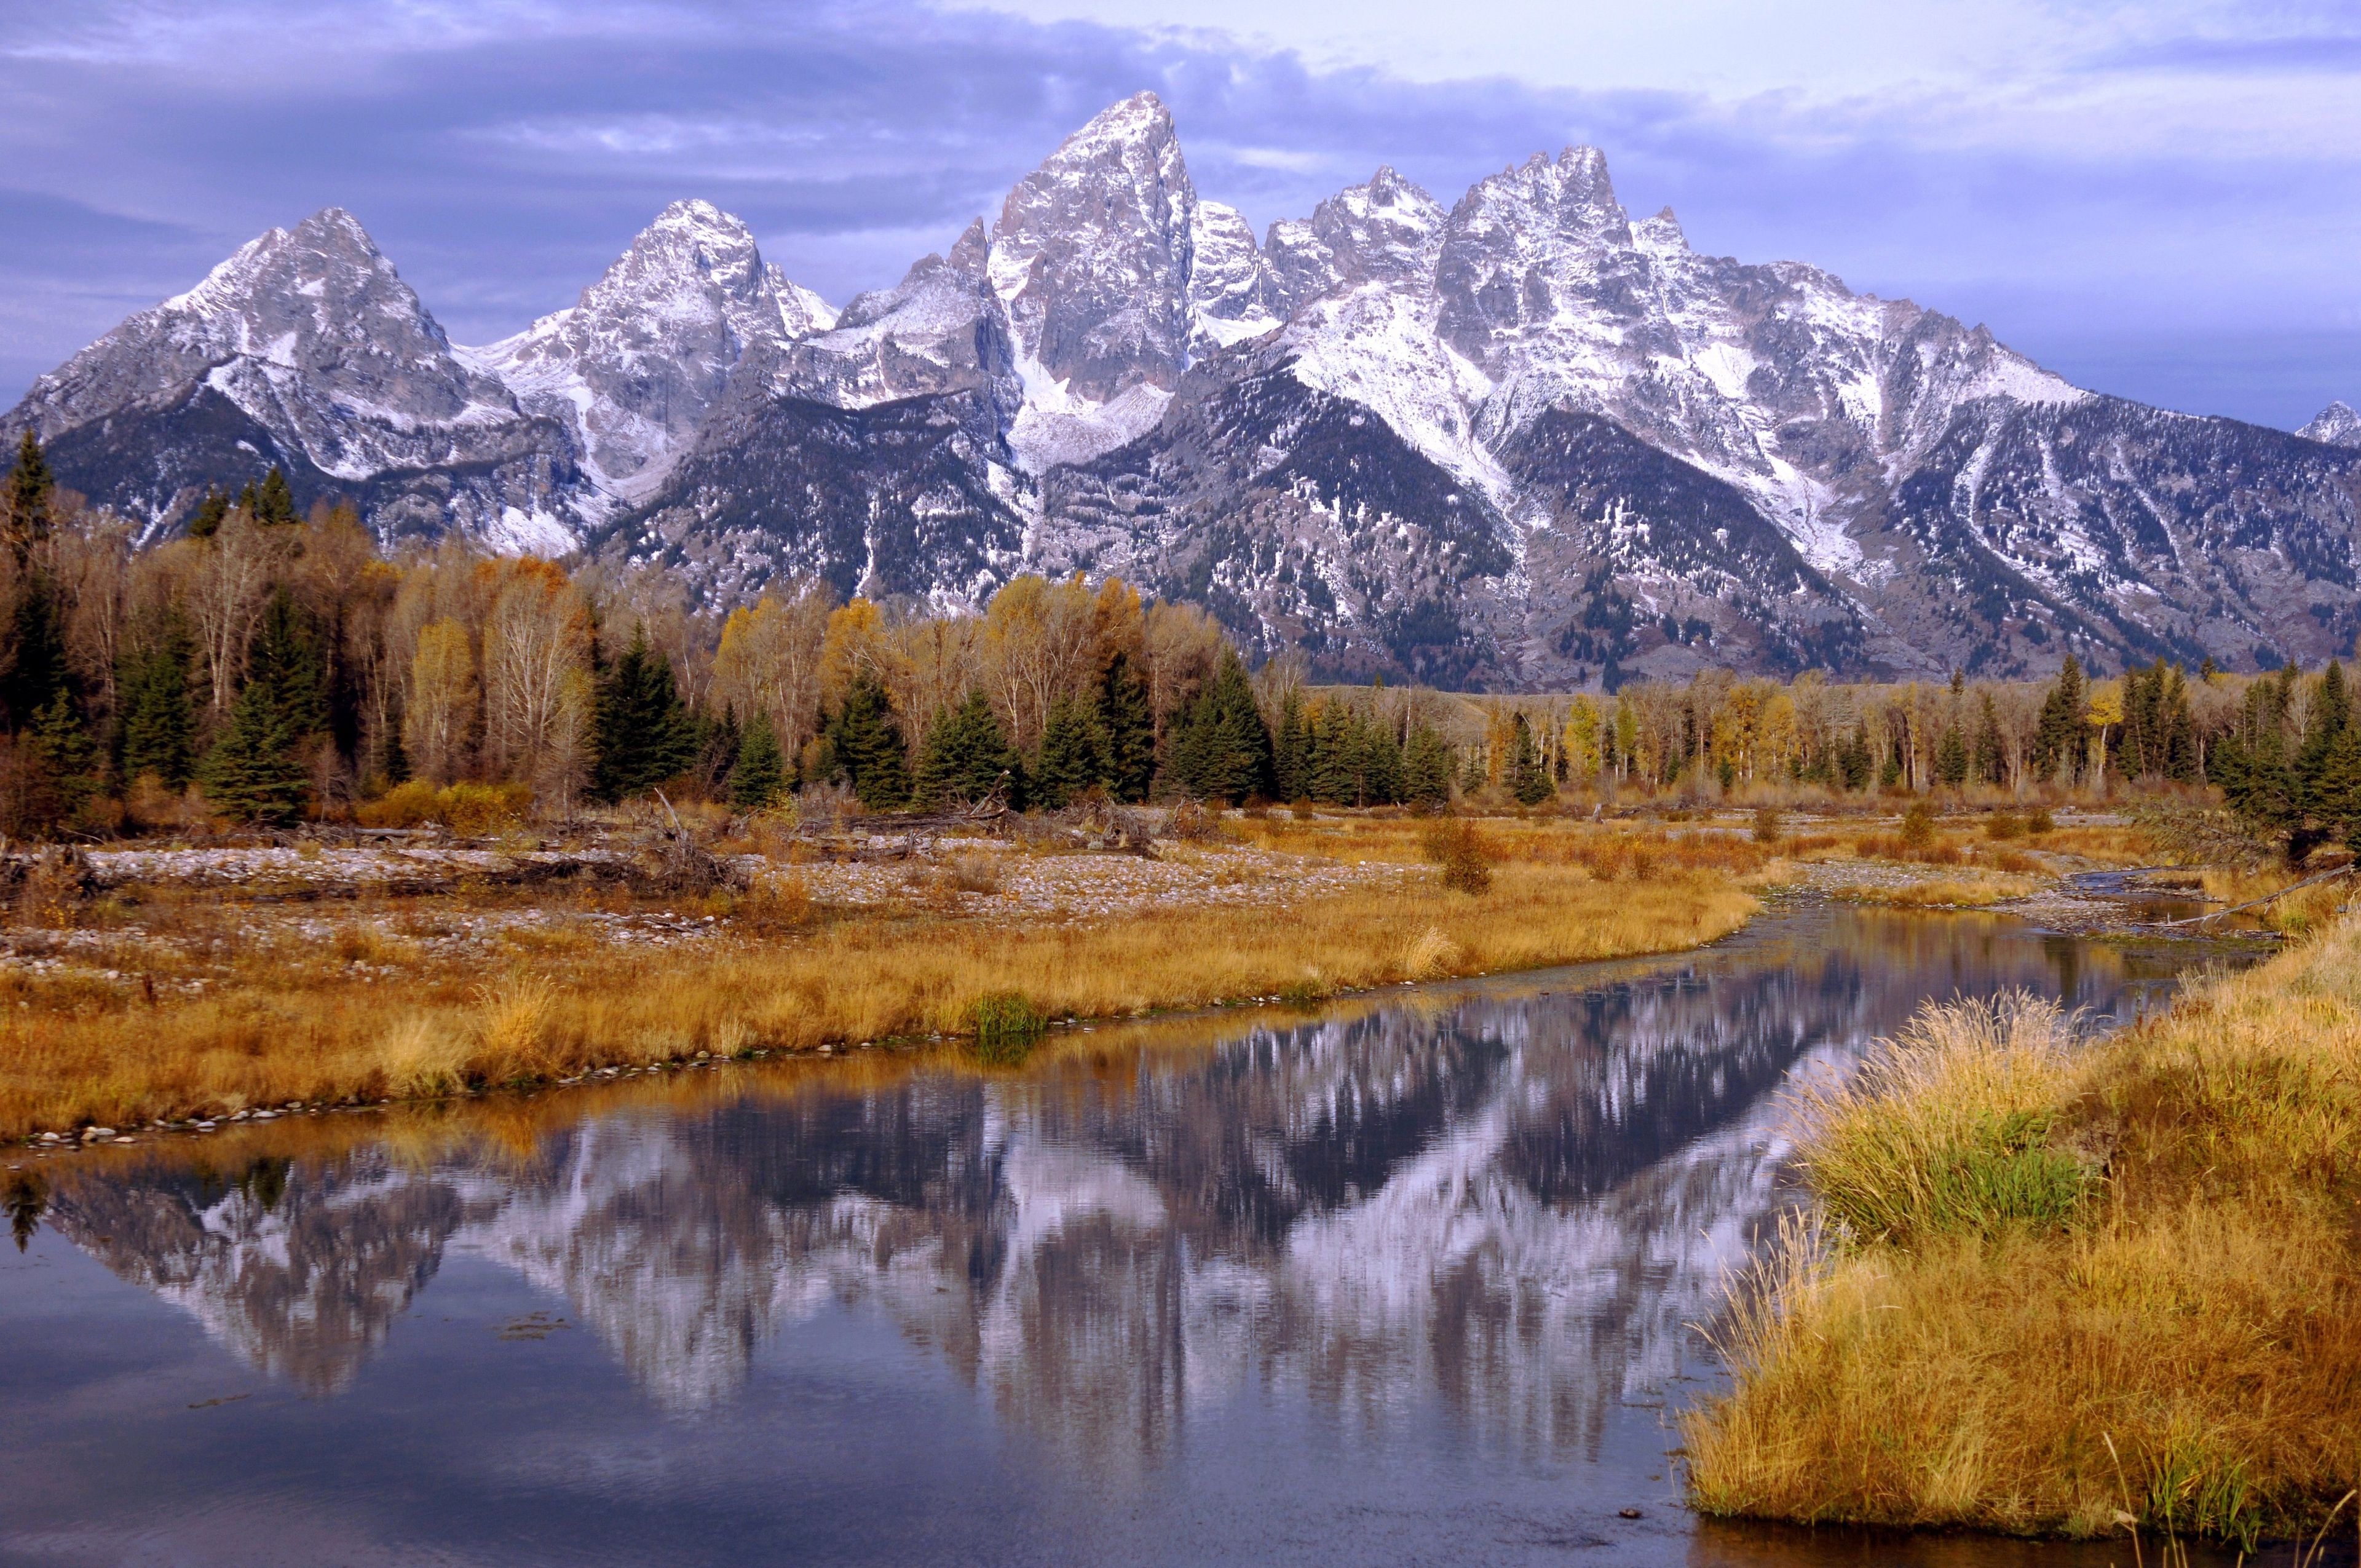 The Teton Mountains reflected in a river in Wyoming.